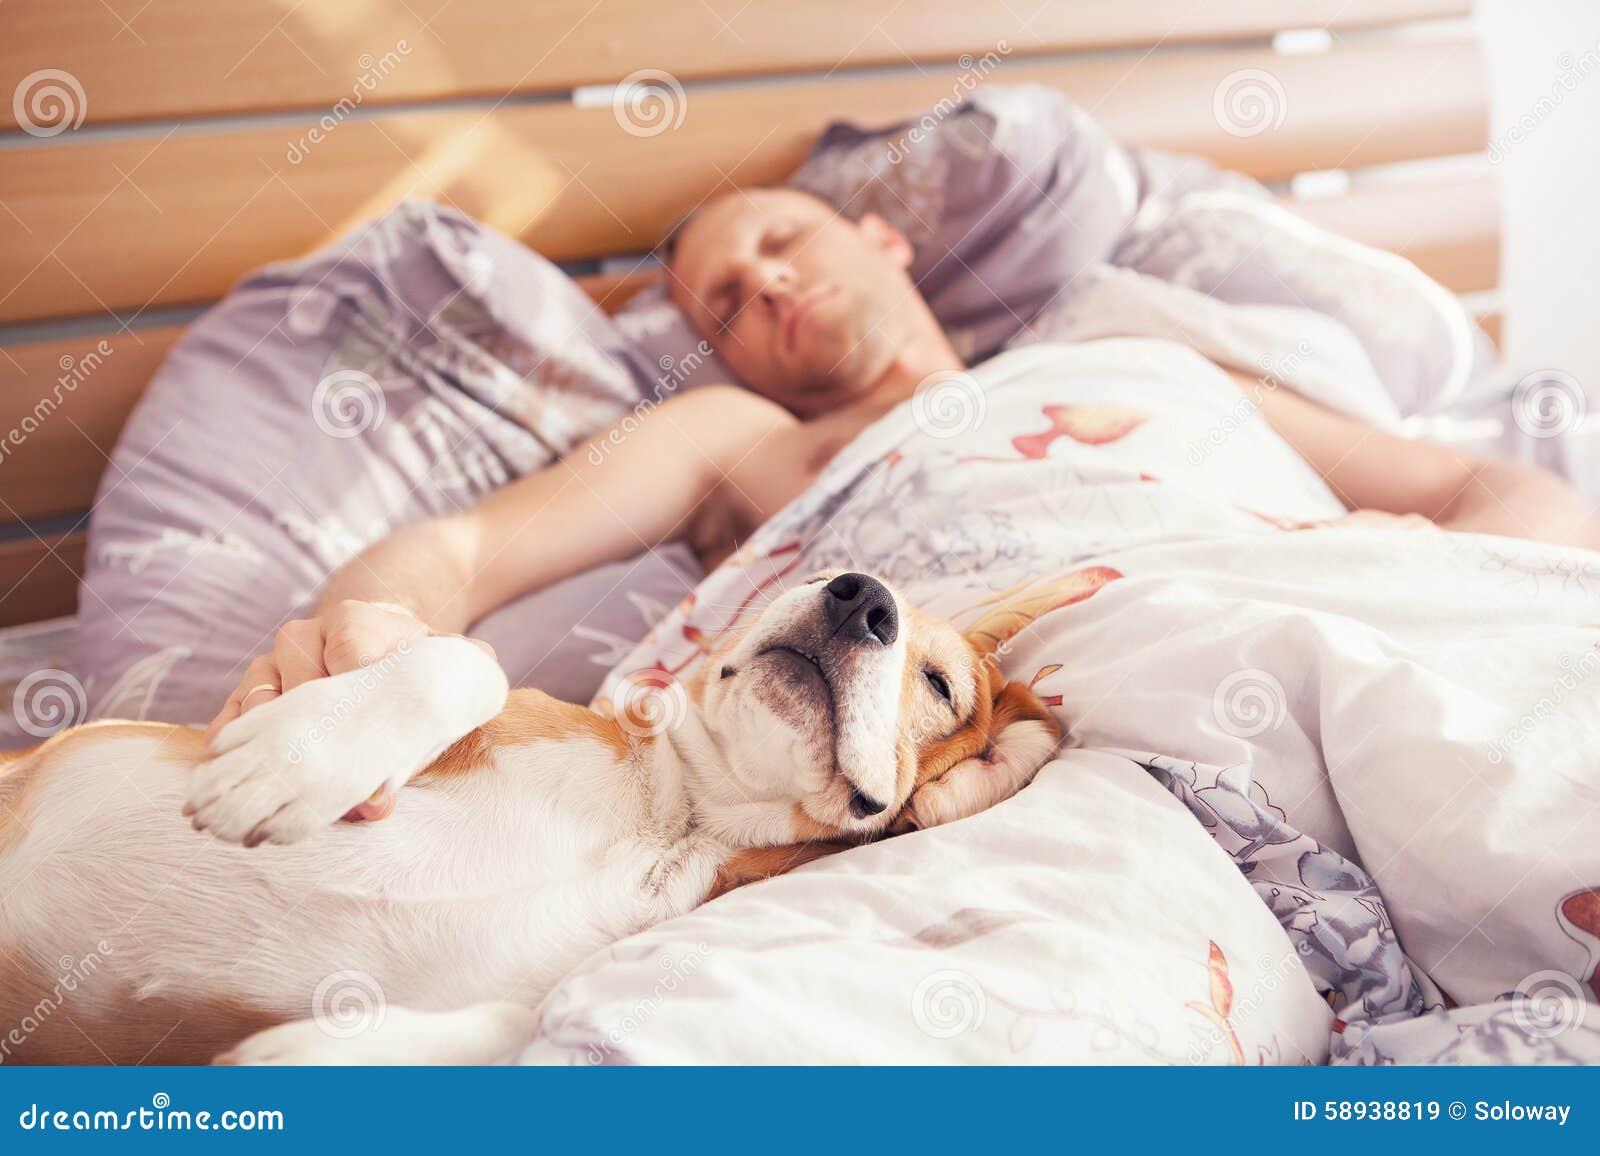 beagle dog sleep with his owner in bed